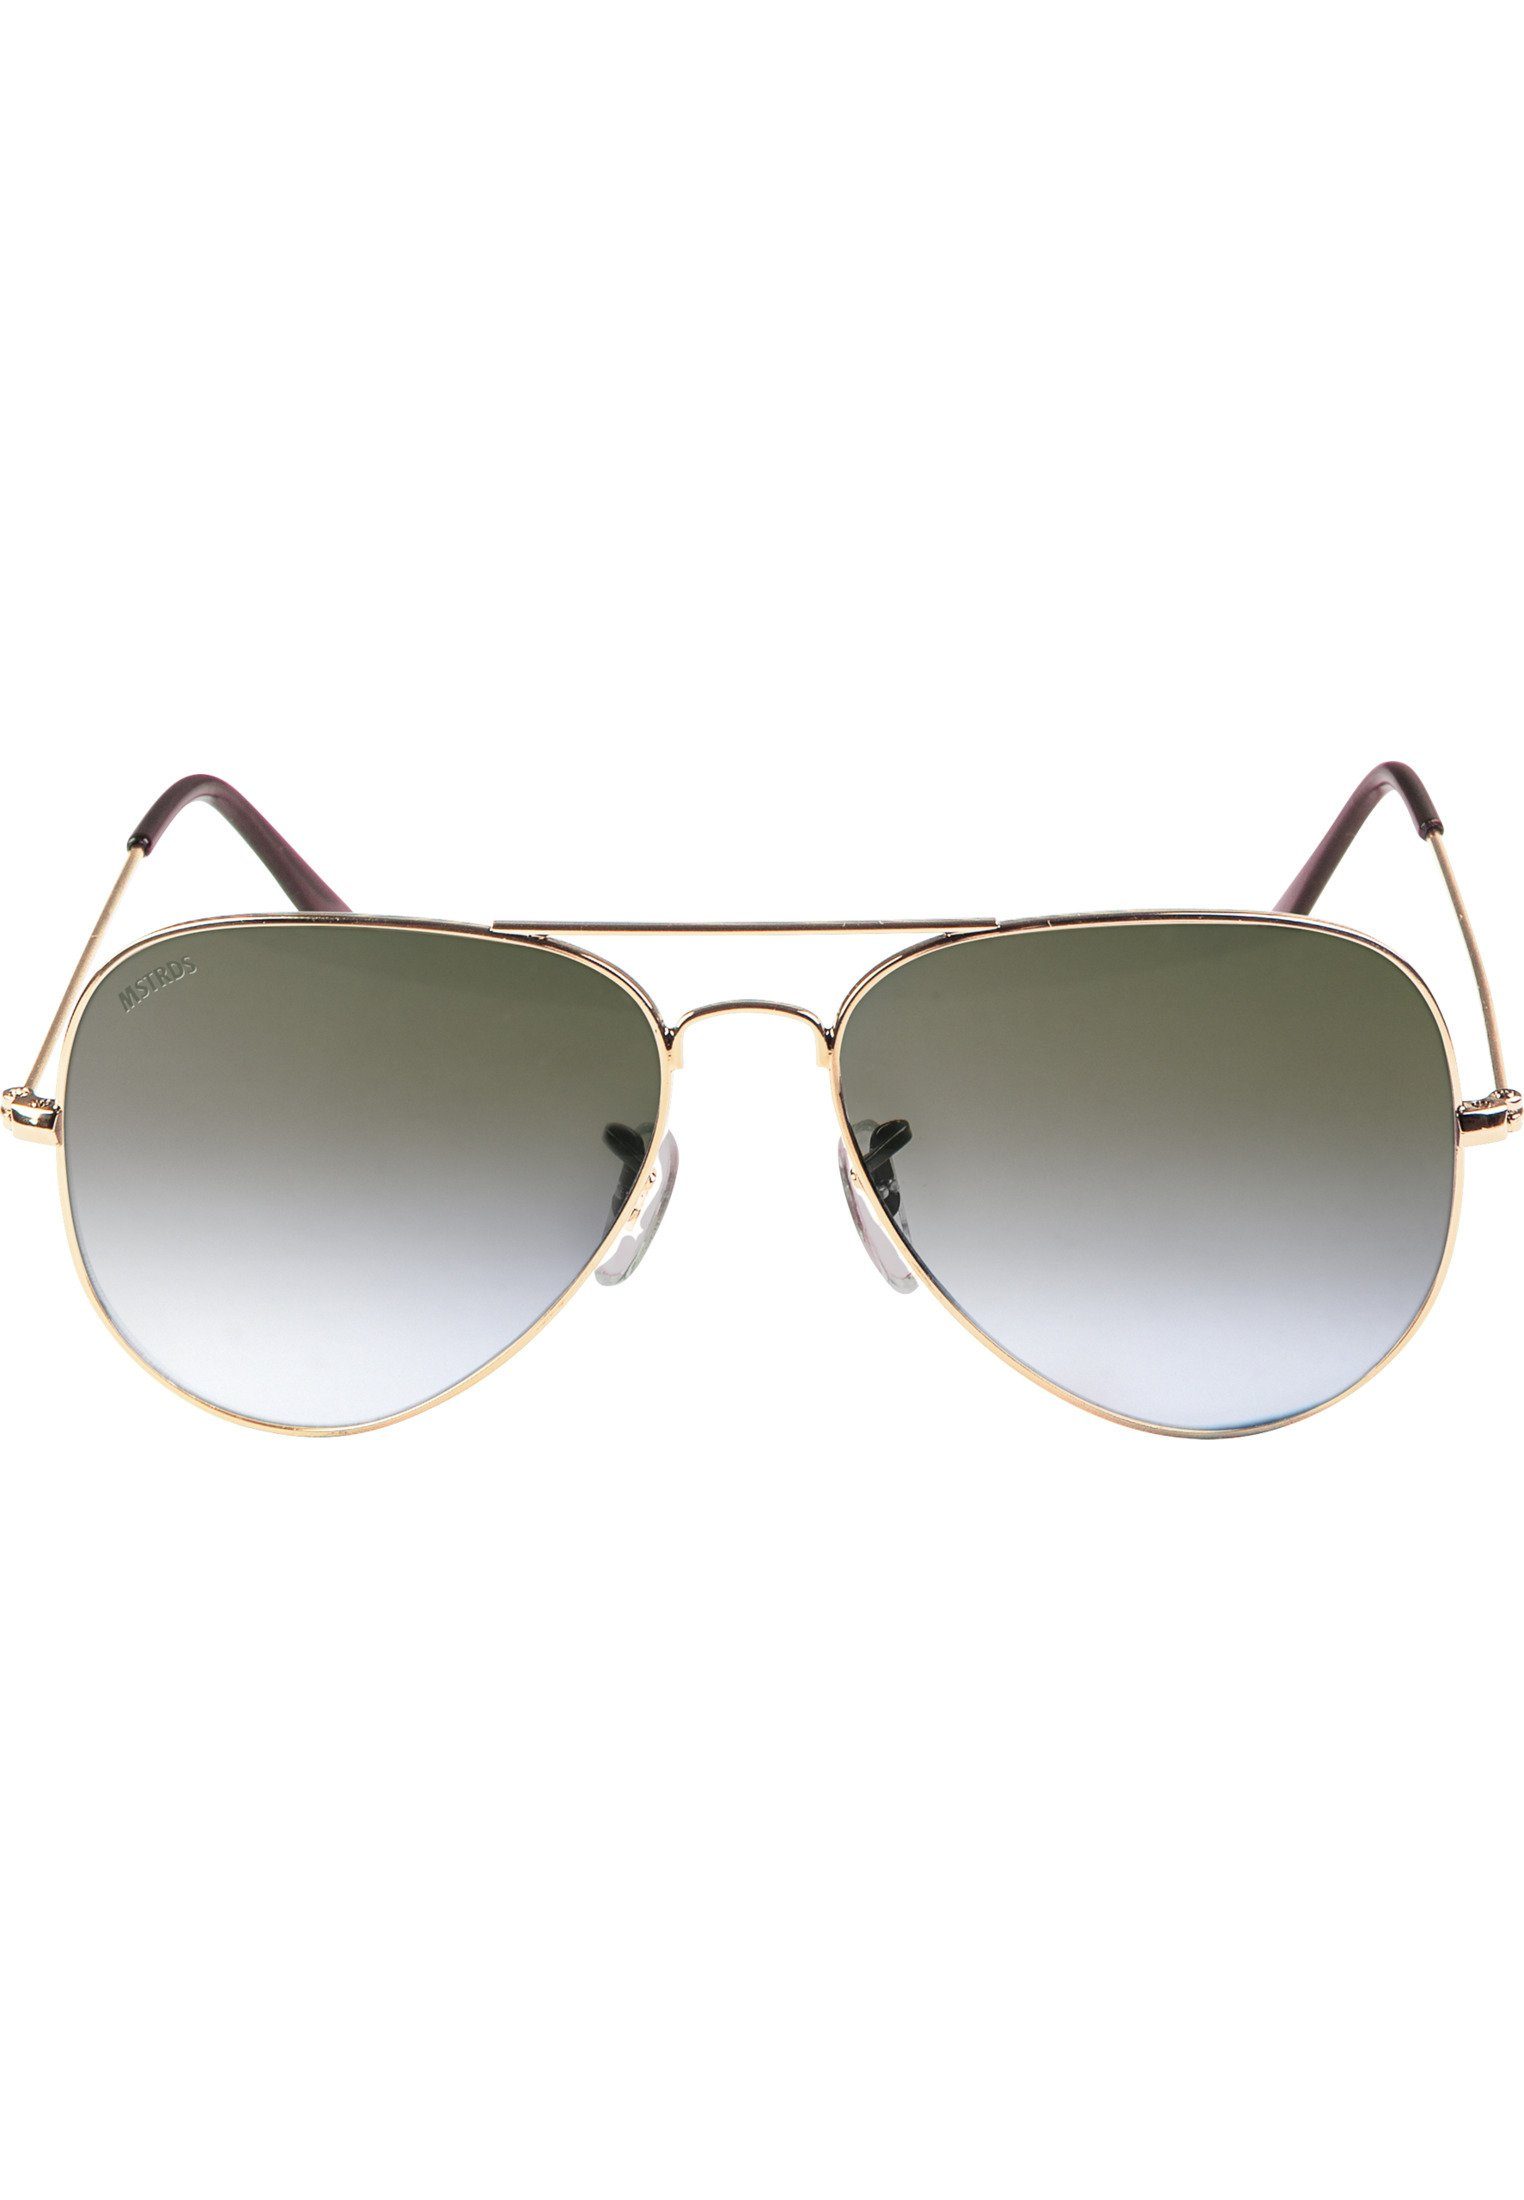 MSTRDS Sonnenbrille Accessoires Sunglasses gold/grey Youth PureAv